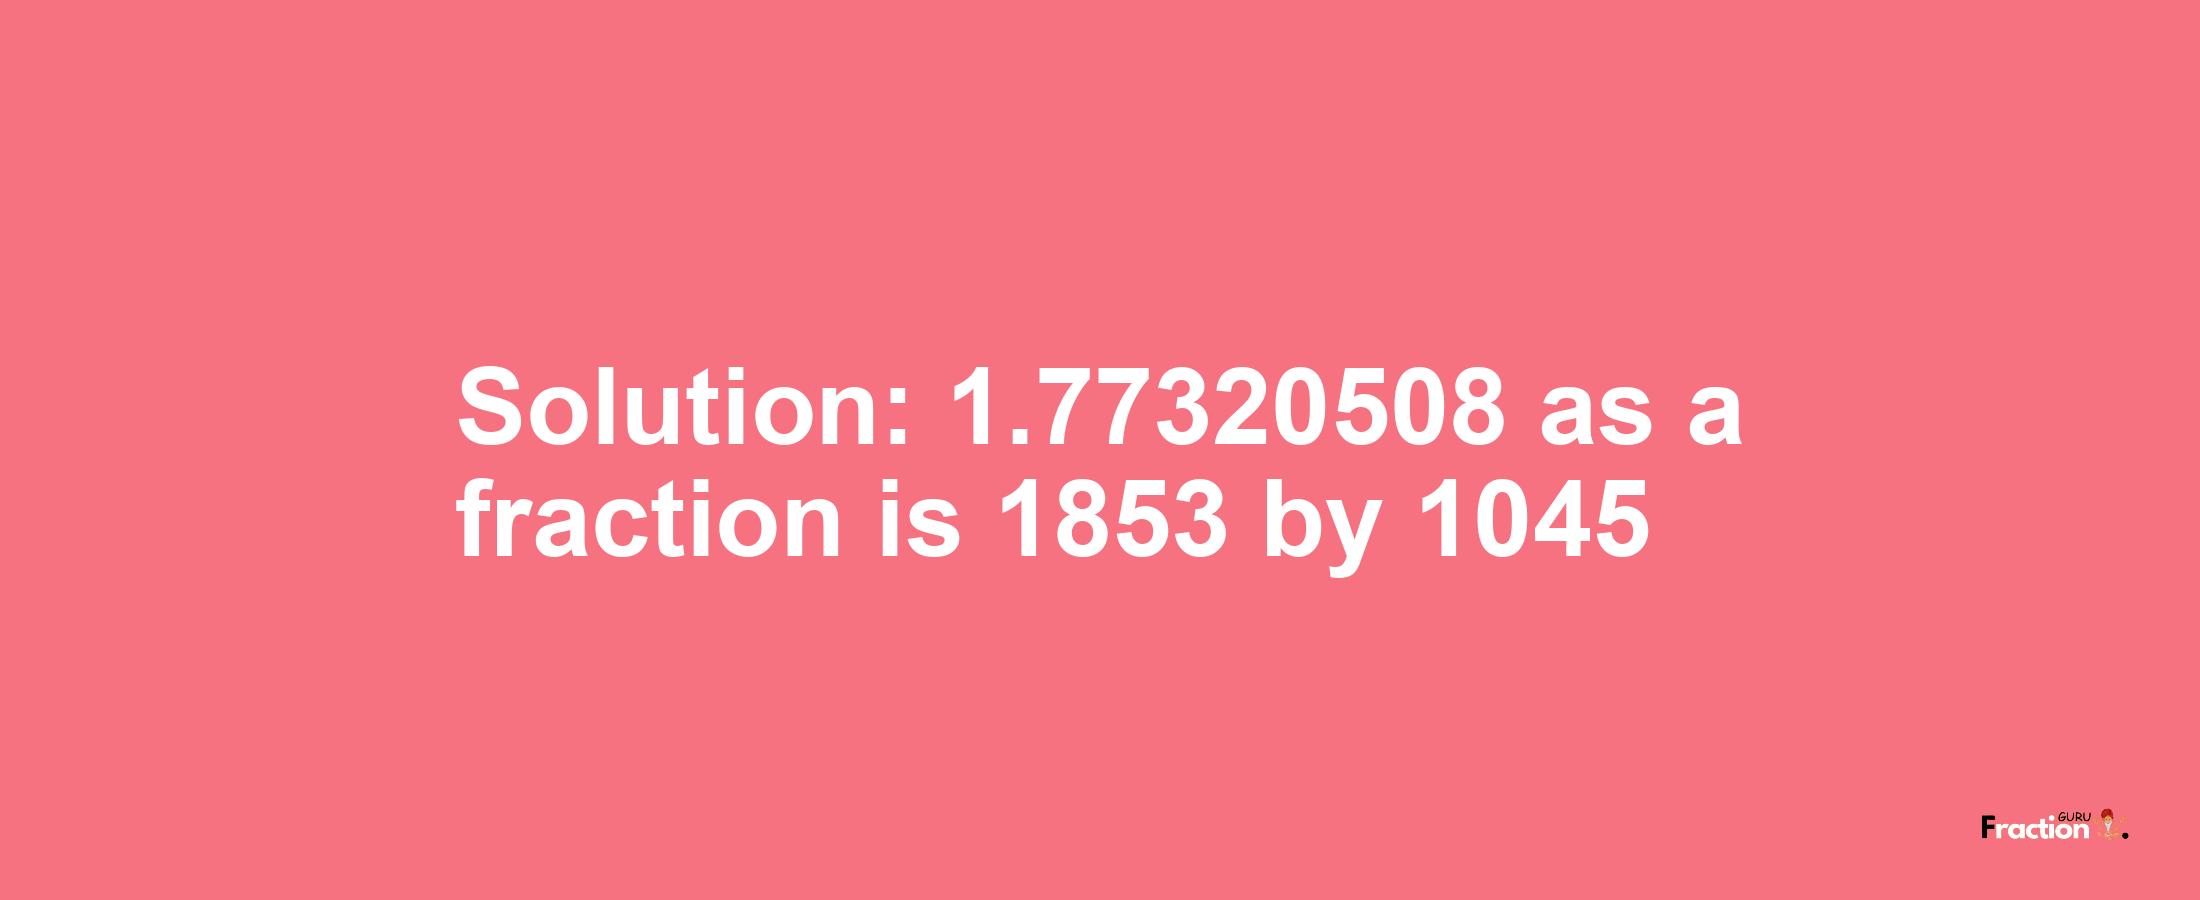 Solution:1.77320508 as a fraction is 1853/1045